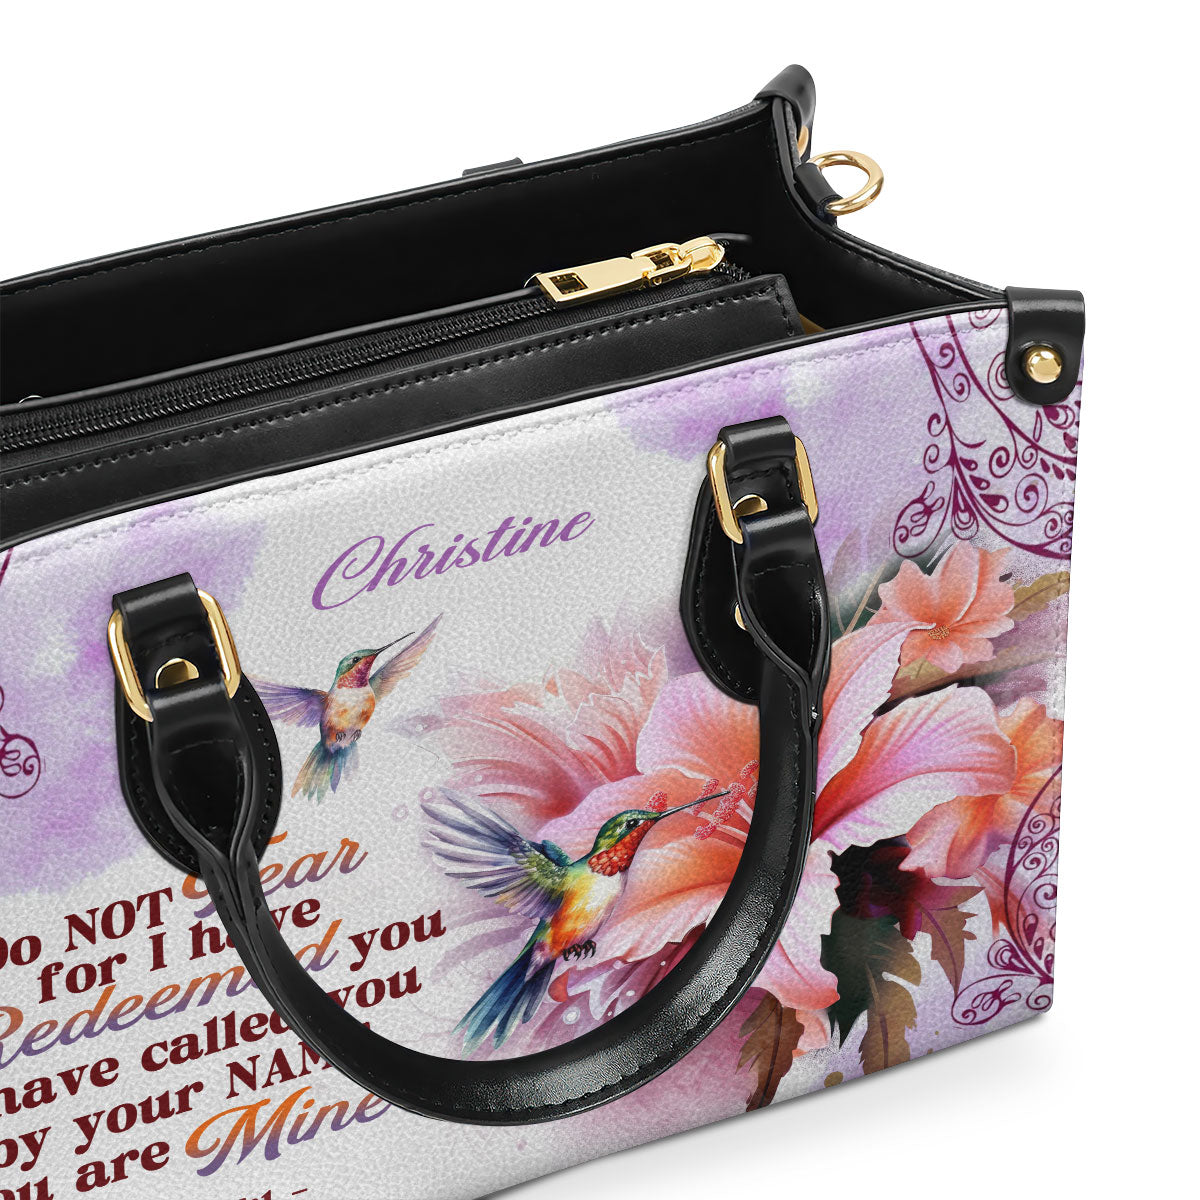 Jesuspirit | Personalized Zippered Leather Handbag With Handle | Religious Gift For Worship Friends | I Have Called You By Your name LHBM768